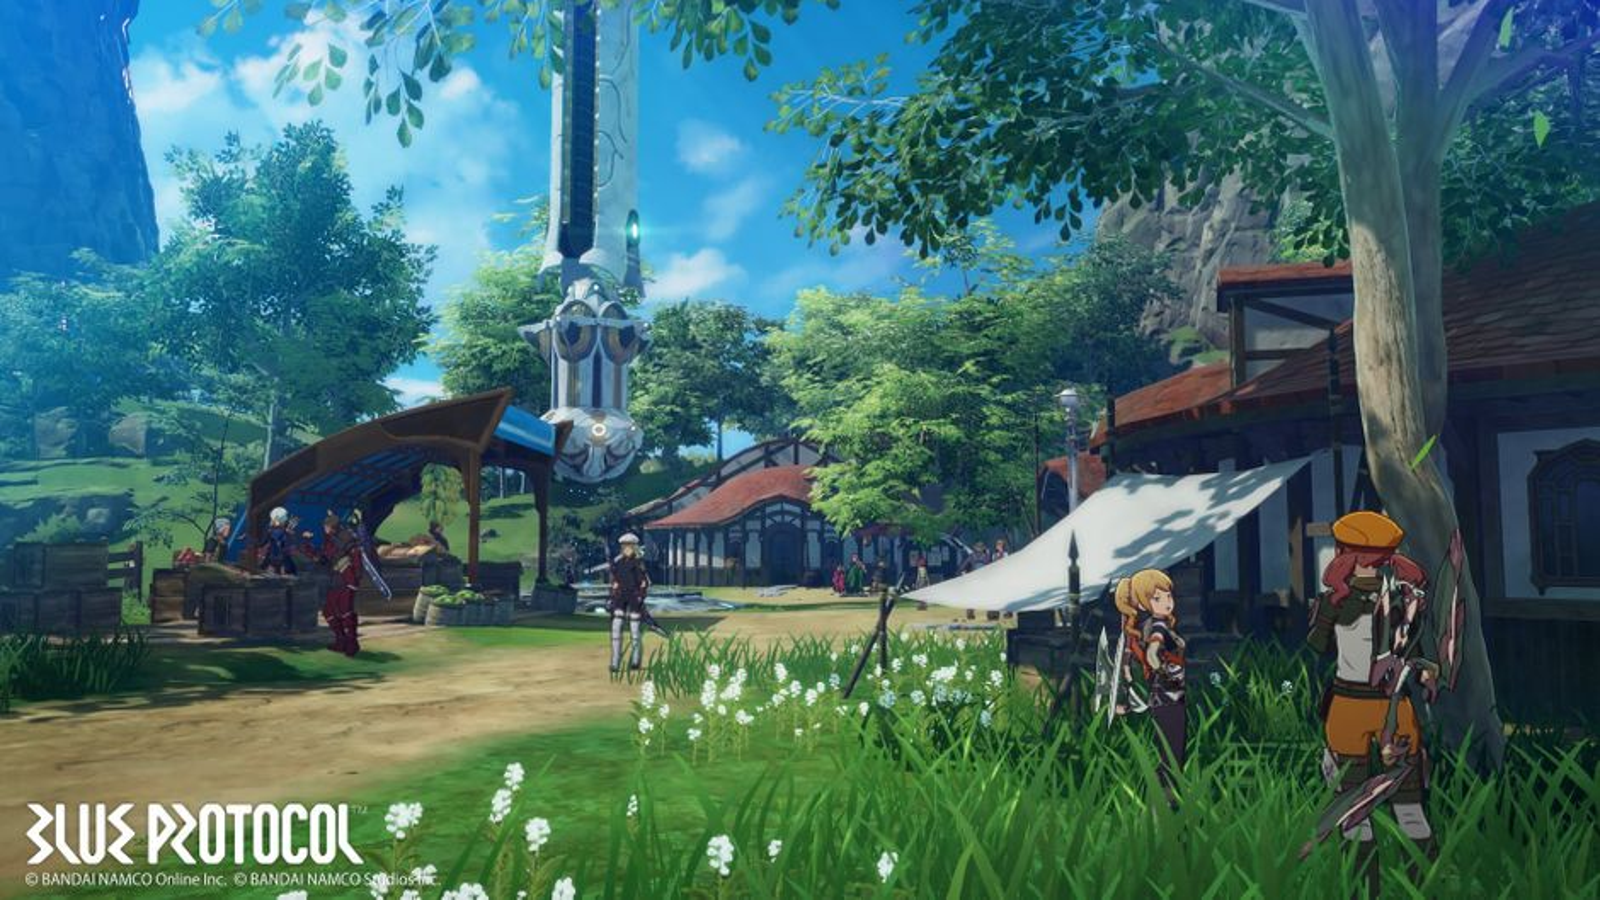 Free-to-play MMO Blue Protocol makes one heck of a first impression